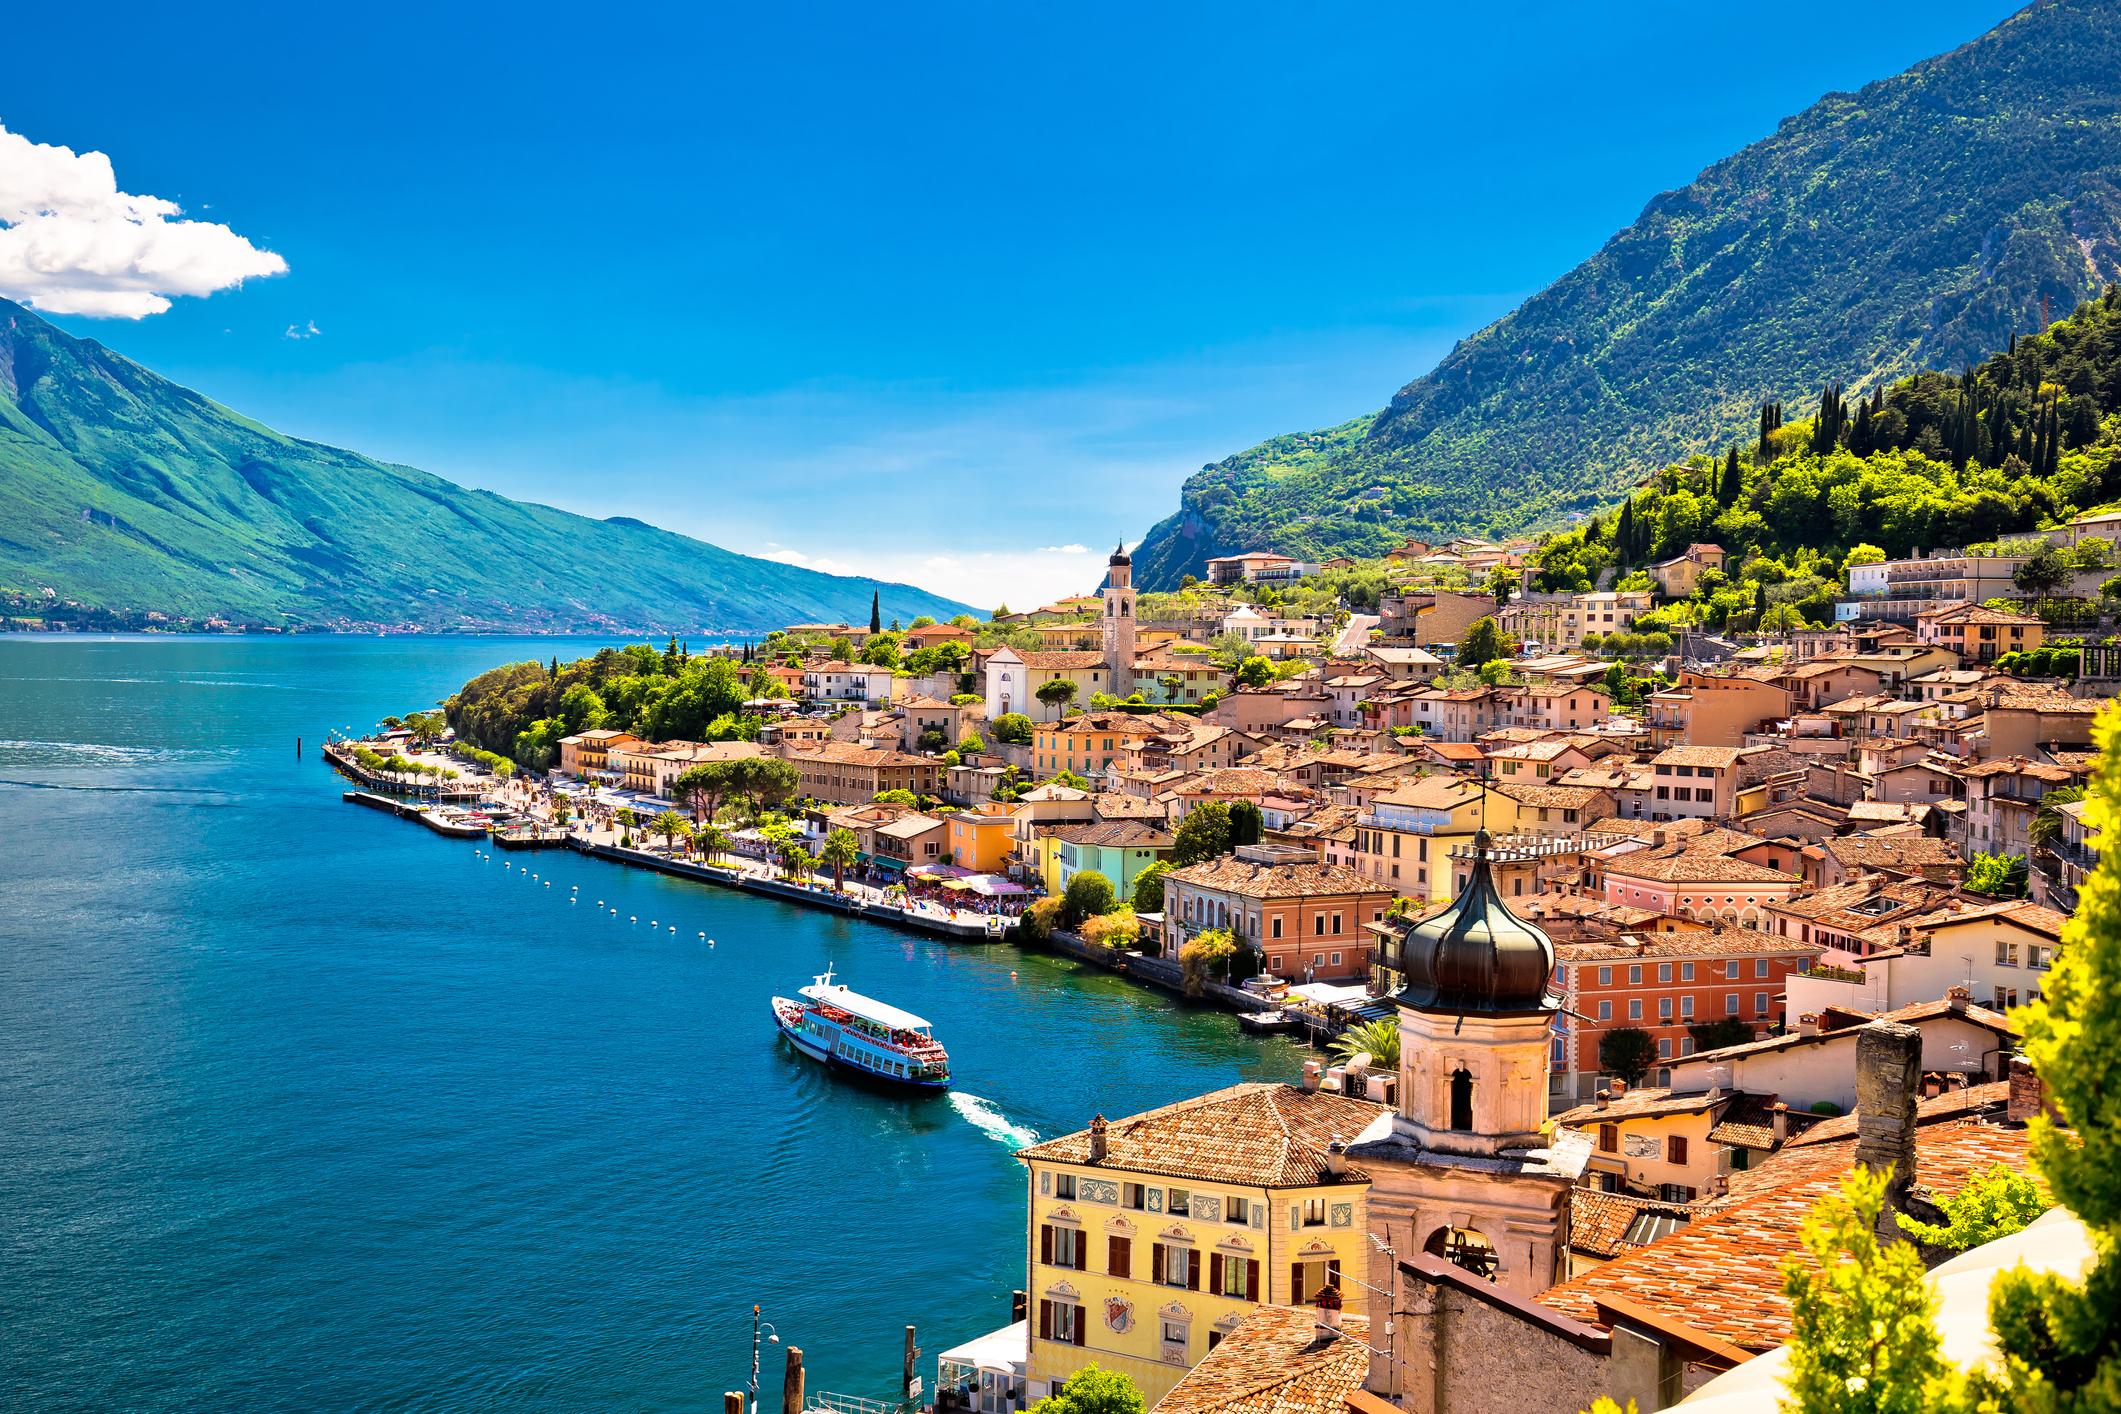 A week at a hotel in Lake Garda, Italy cost a quarter of the equivalent in the UK’s Lake District